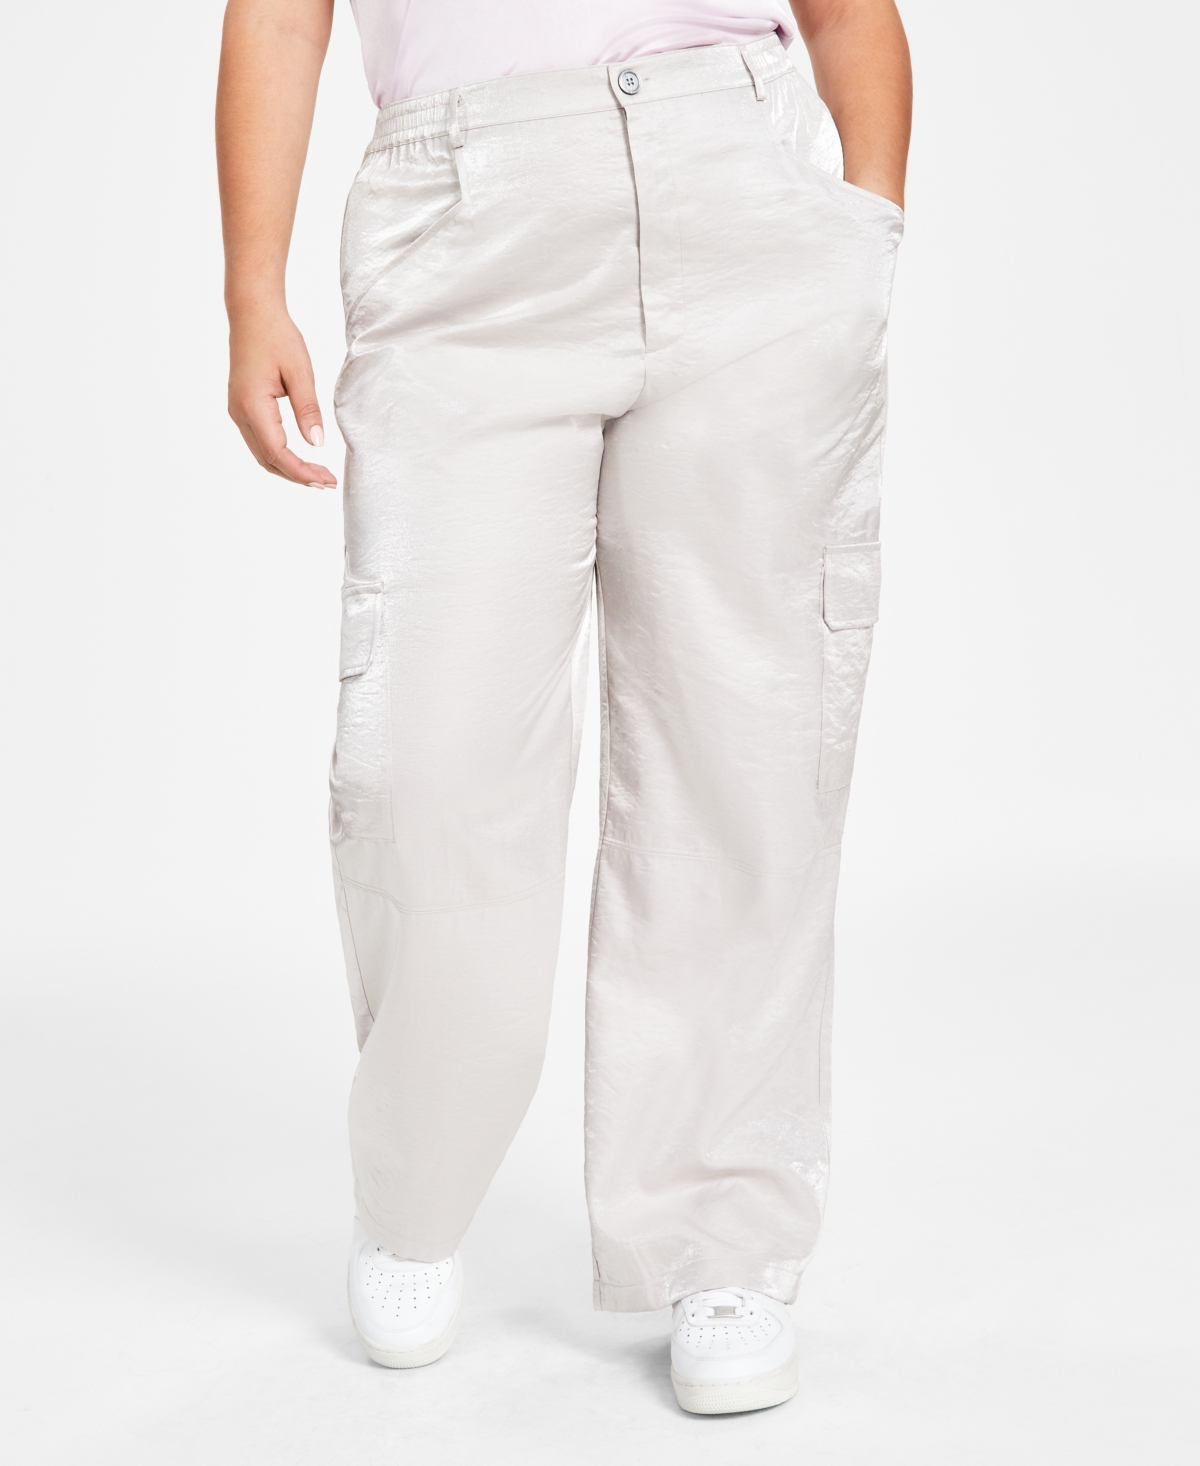 Bar Iii Plus Size Shine High-rise Cargo Pants, Created For Macy's In Lunar Rock